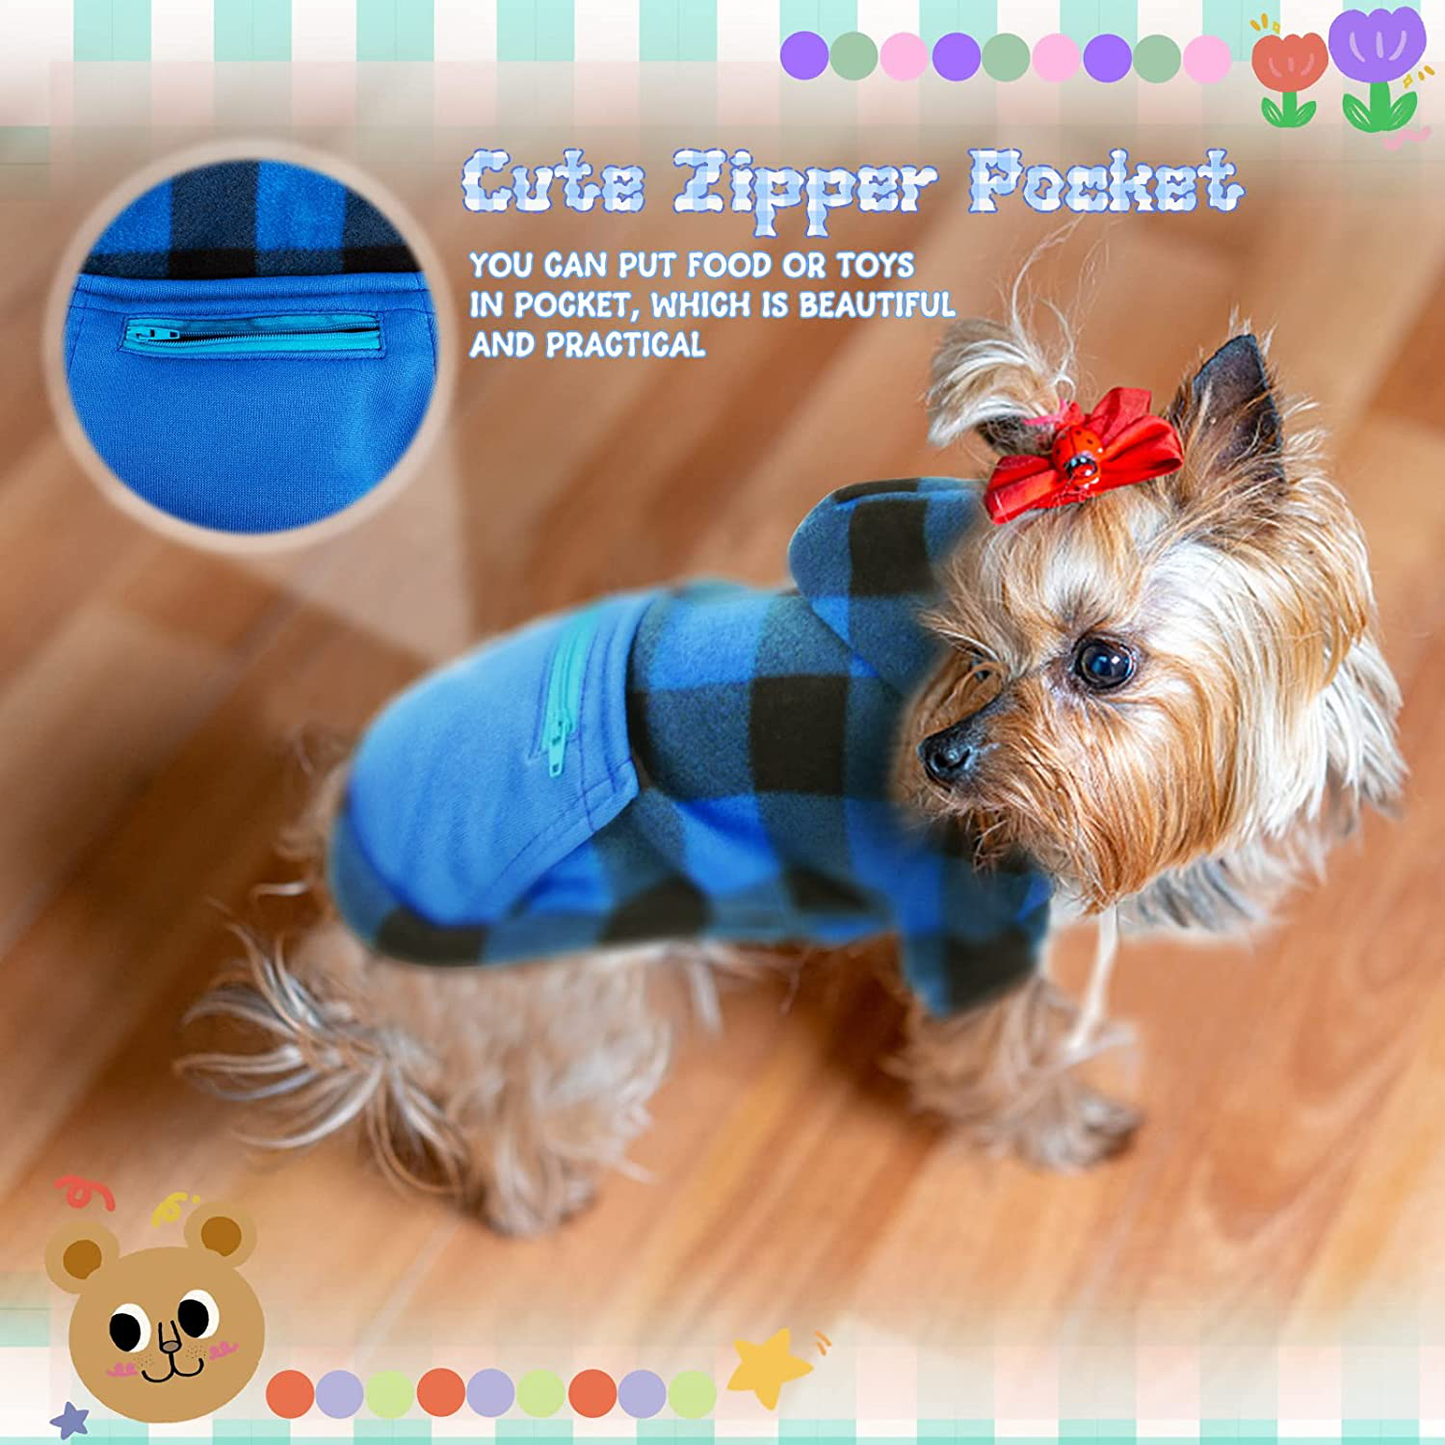 Rypet 2 Packs Plaid Dog Hoodie Sweatshirt Sweater for Dogs Pet Clothes with Hat and Pocket Warm Puppy Sweater for Small Dogs Girl & Boy